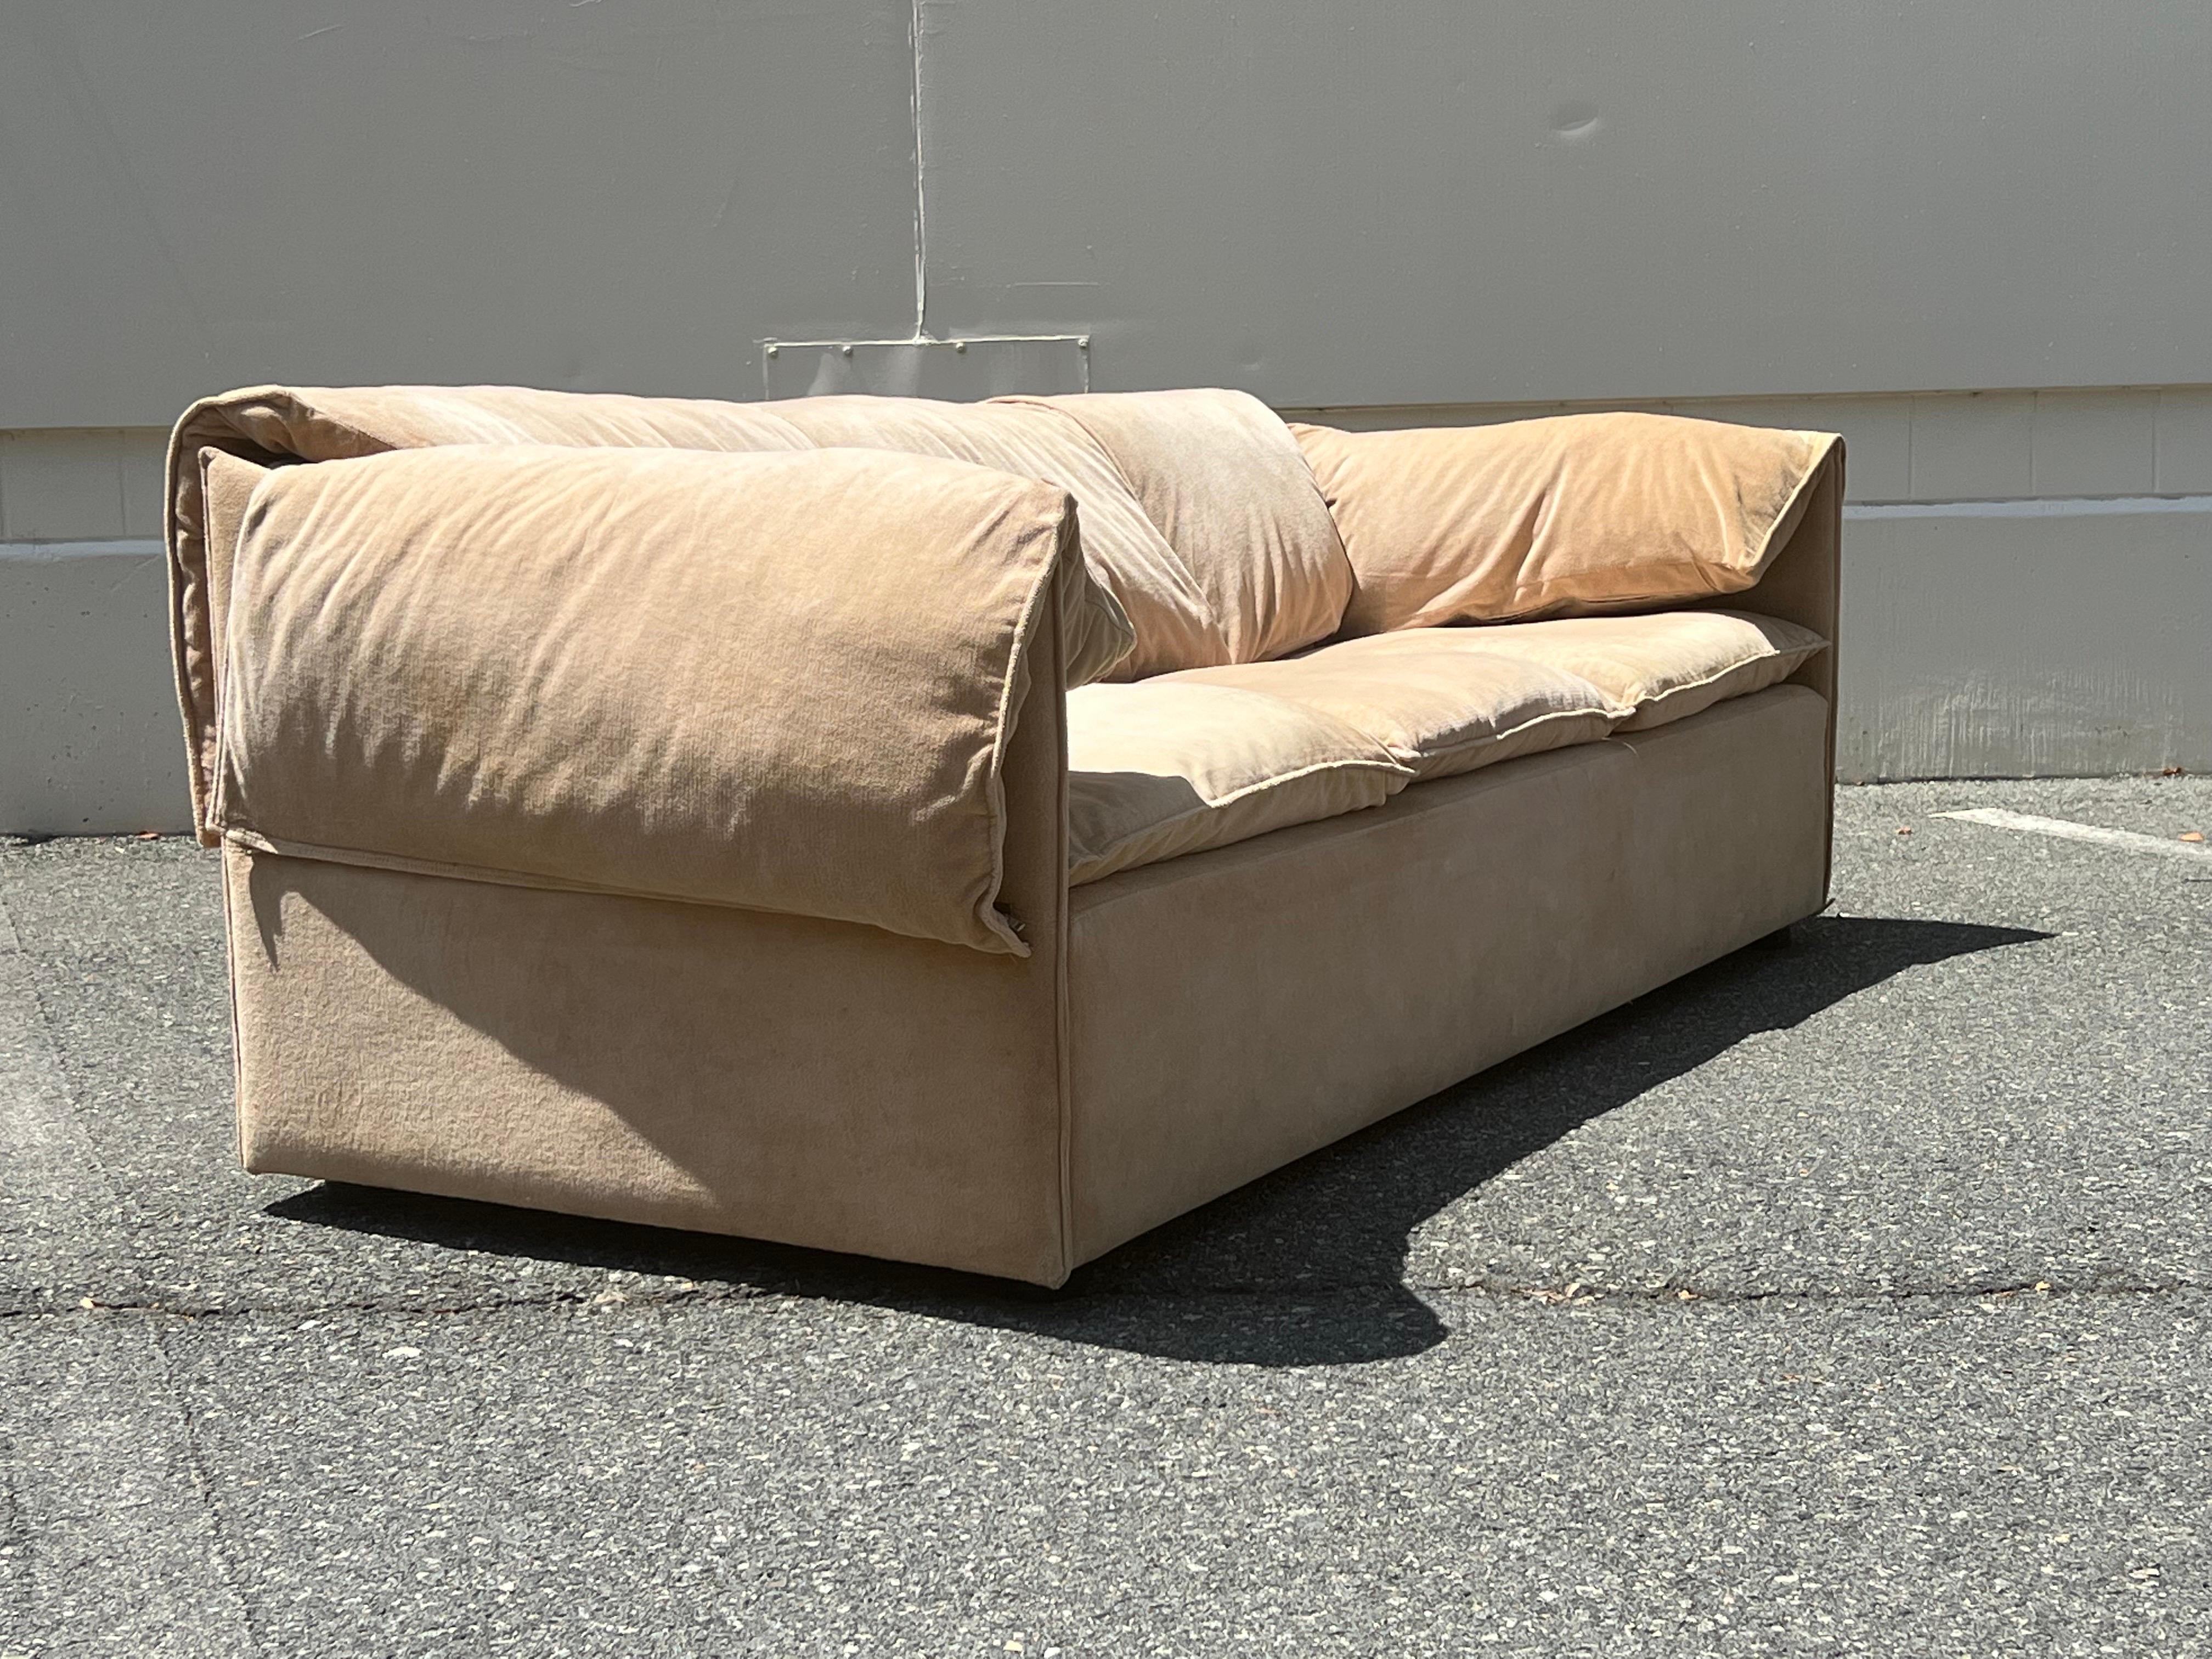 Unique “Lotus” Sofa by Niels Bendtsen for Niels Eilersen, 1974. Made in Denmark with original tan / camel upholstery. Overall wear is consistent with age, regarding the upholstery and could use new foam and fabric for an updated look. The sides and